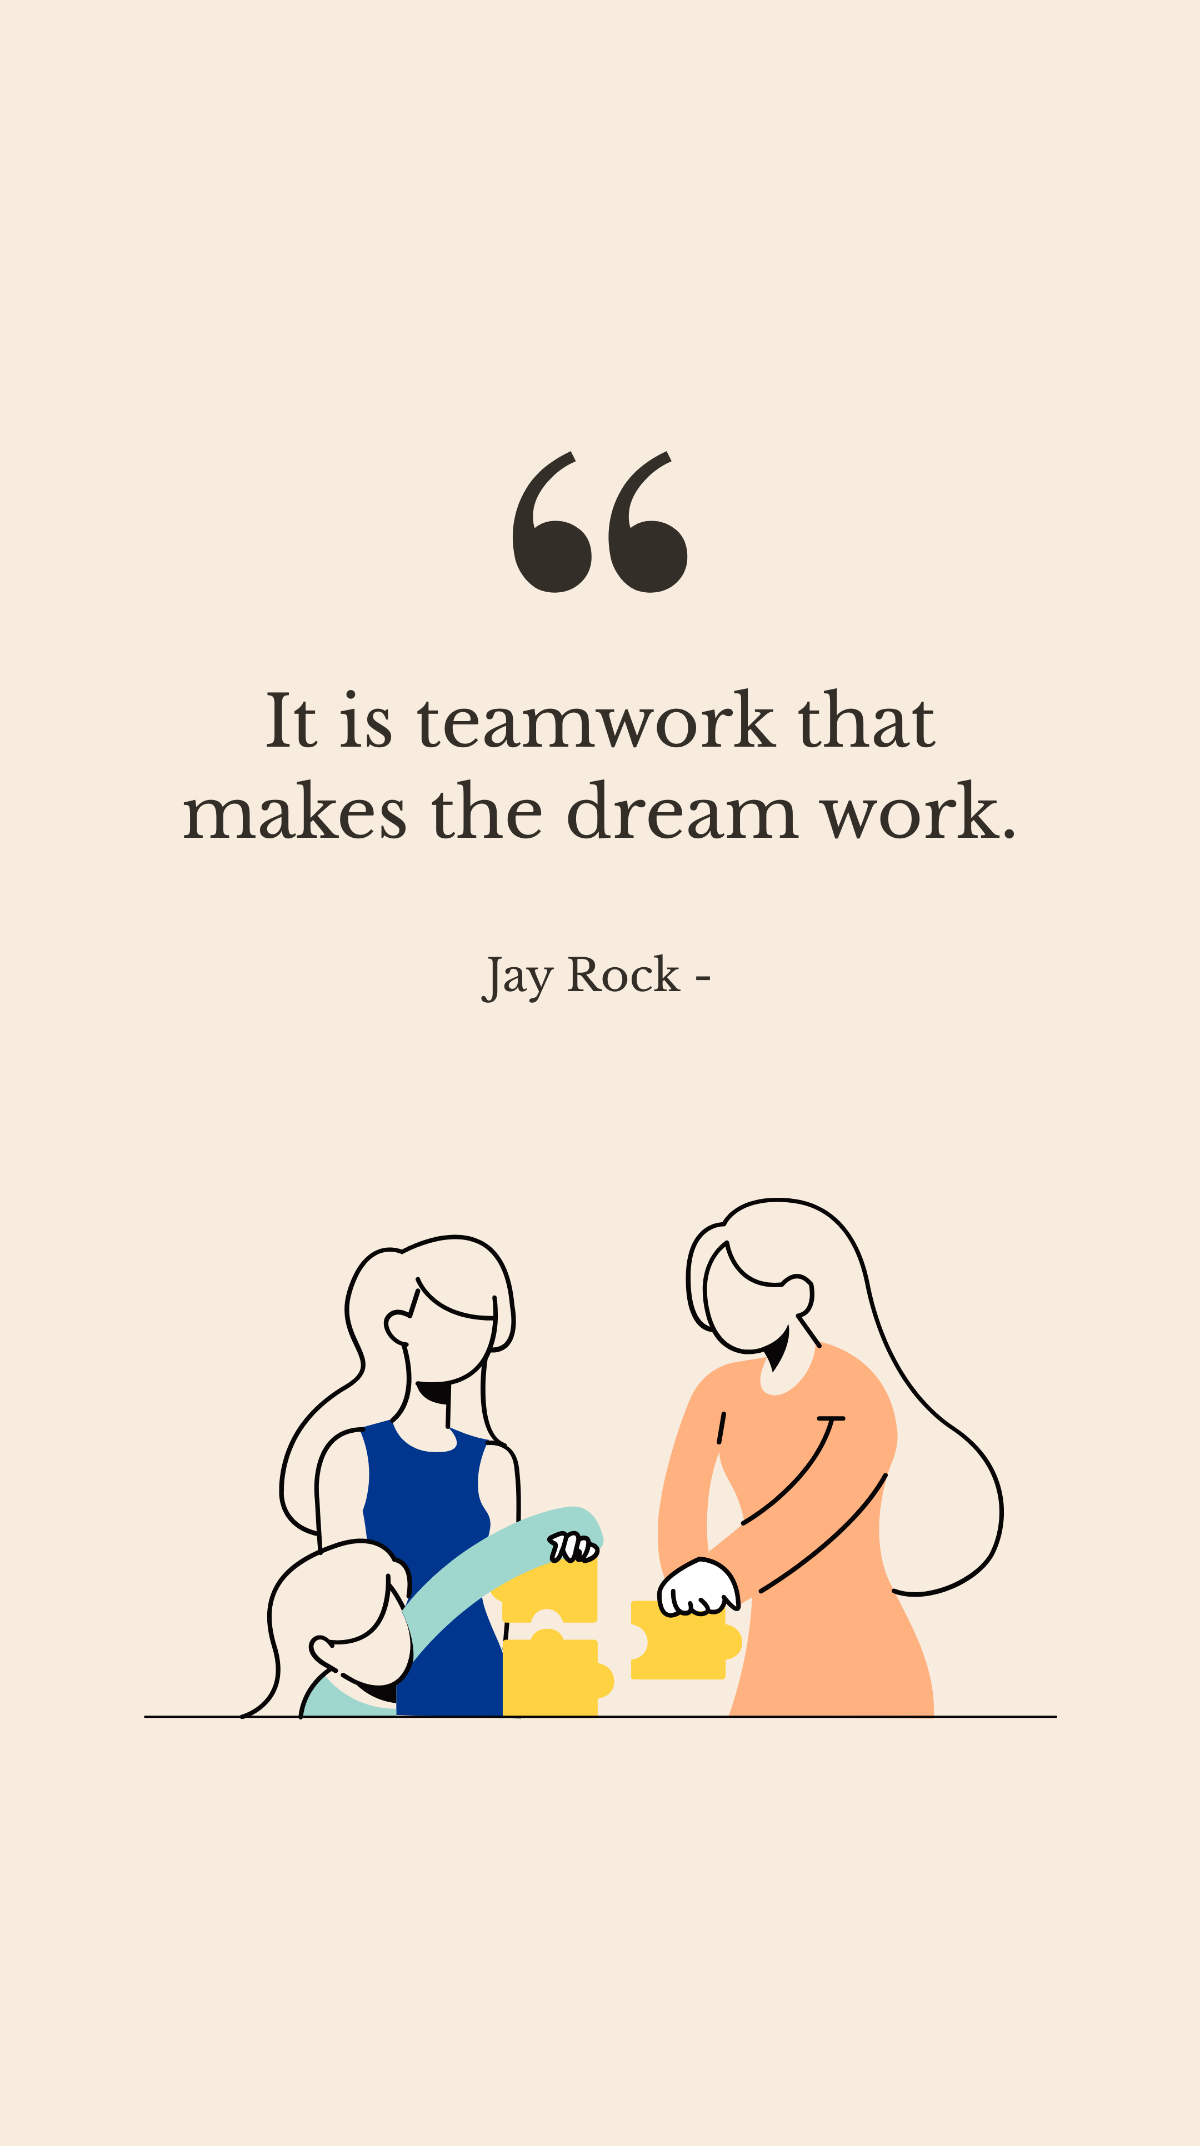 Jay Rock - It is teamwork that makes the dream work.